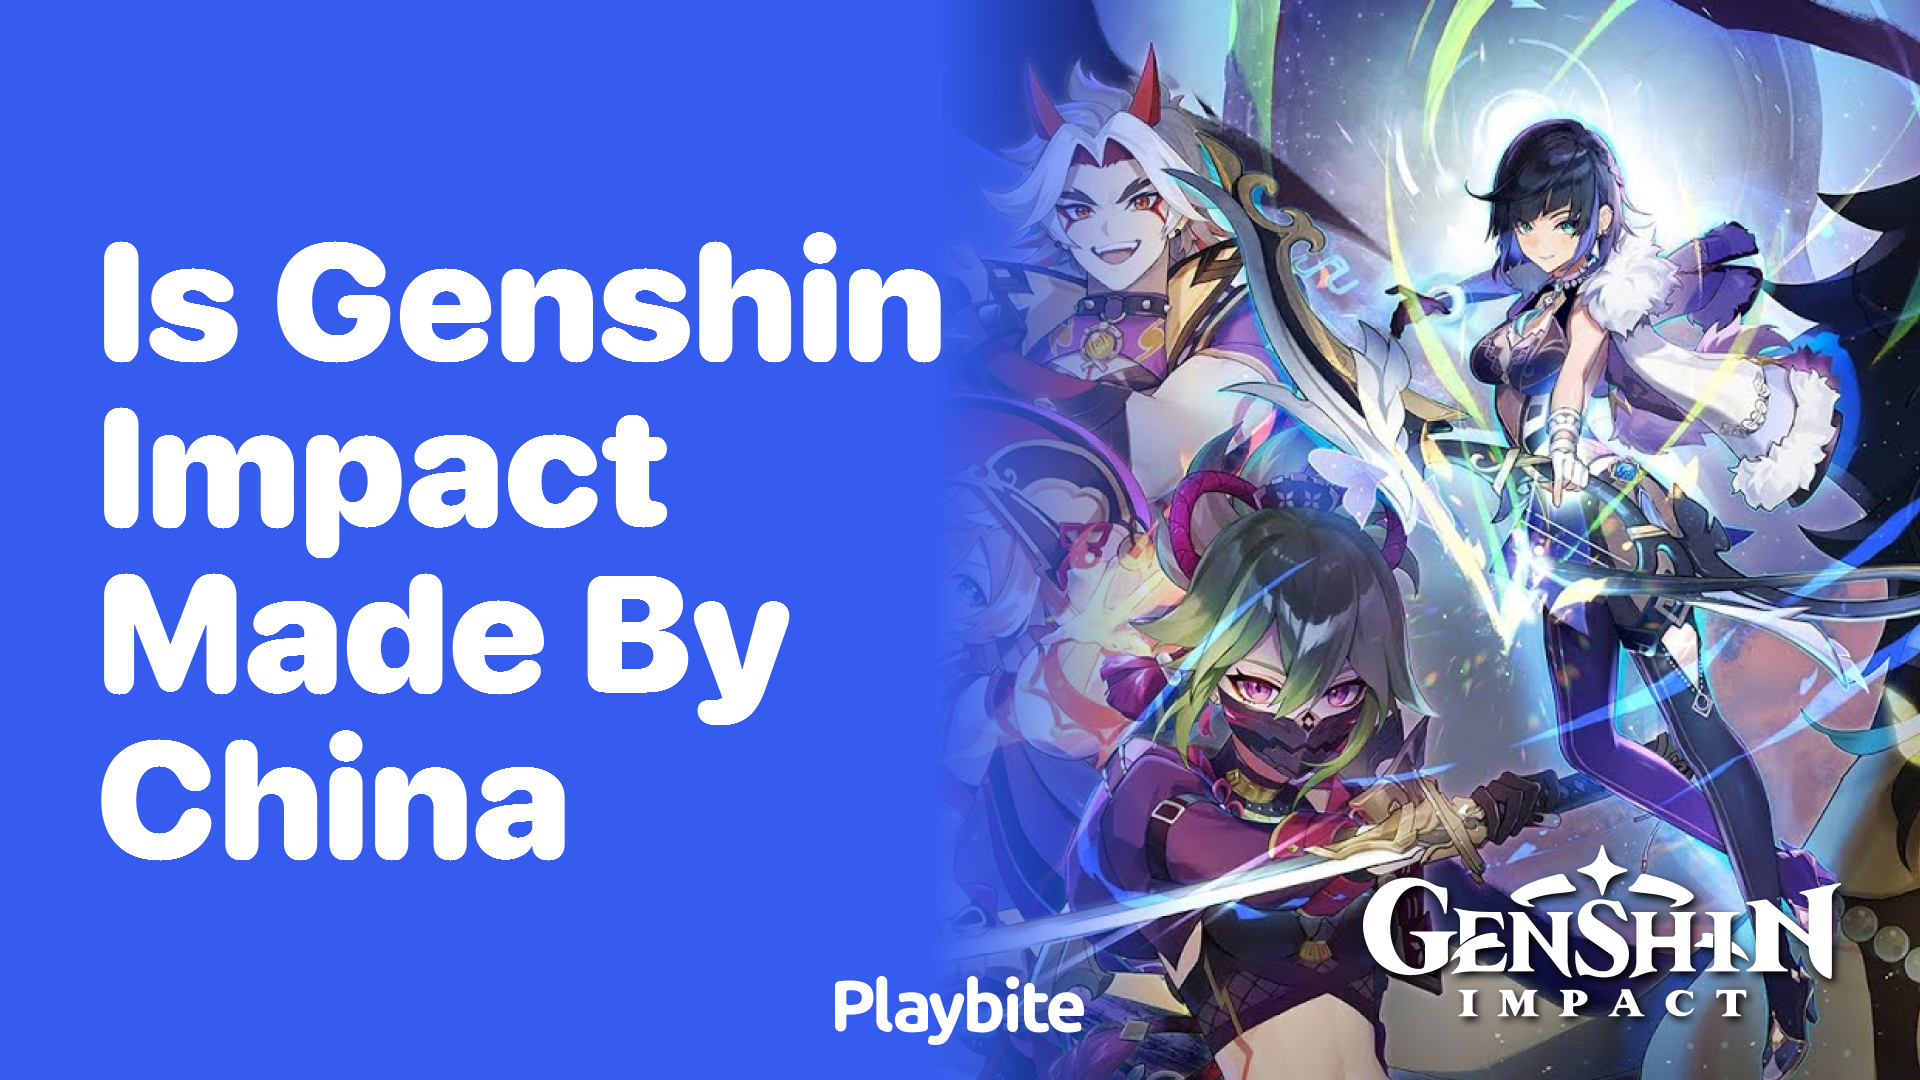 How Genshin Impact's Chinese creator miHoYo found success with